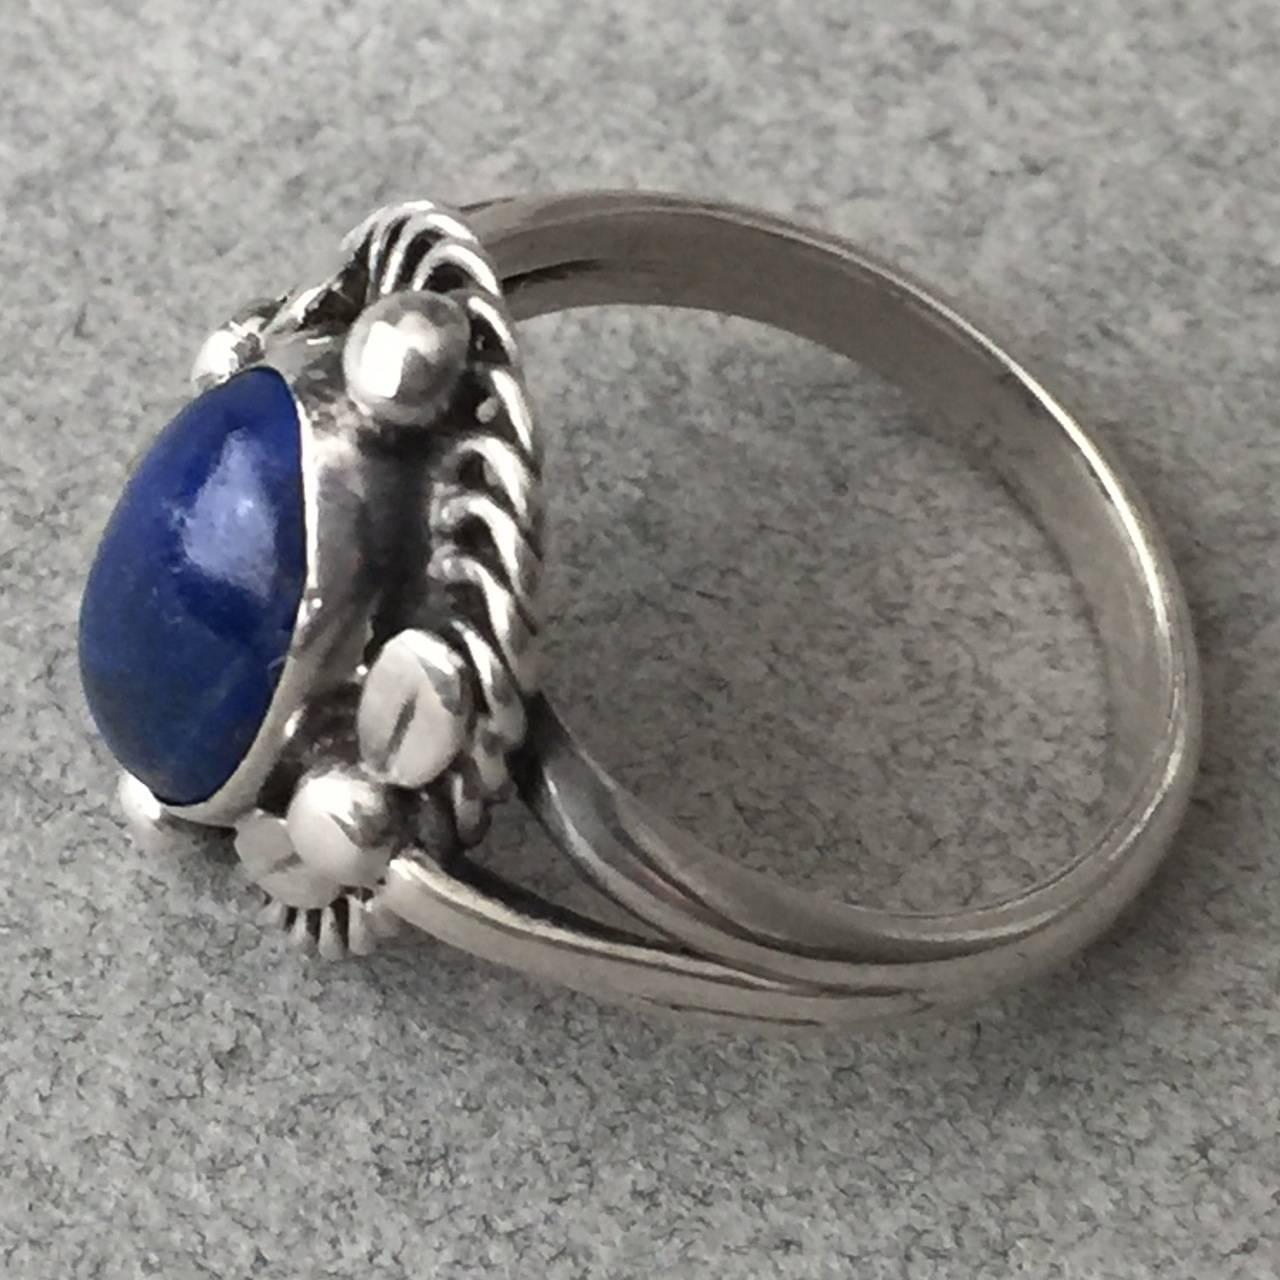 Georg Jensen 830 Silver Ring No. 1 with Lapis Lazuli.

Classic Jensen design with a beautiful lapis lazuli stone.This is the first ring that Georg Jensen designed.  Excellent condition with gorgeous patina.

Size 7.5